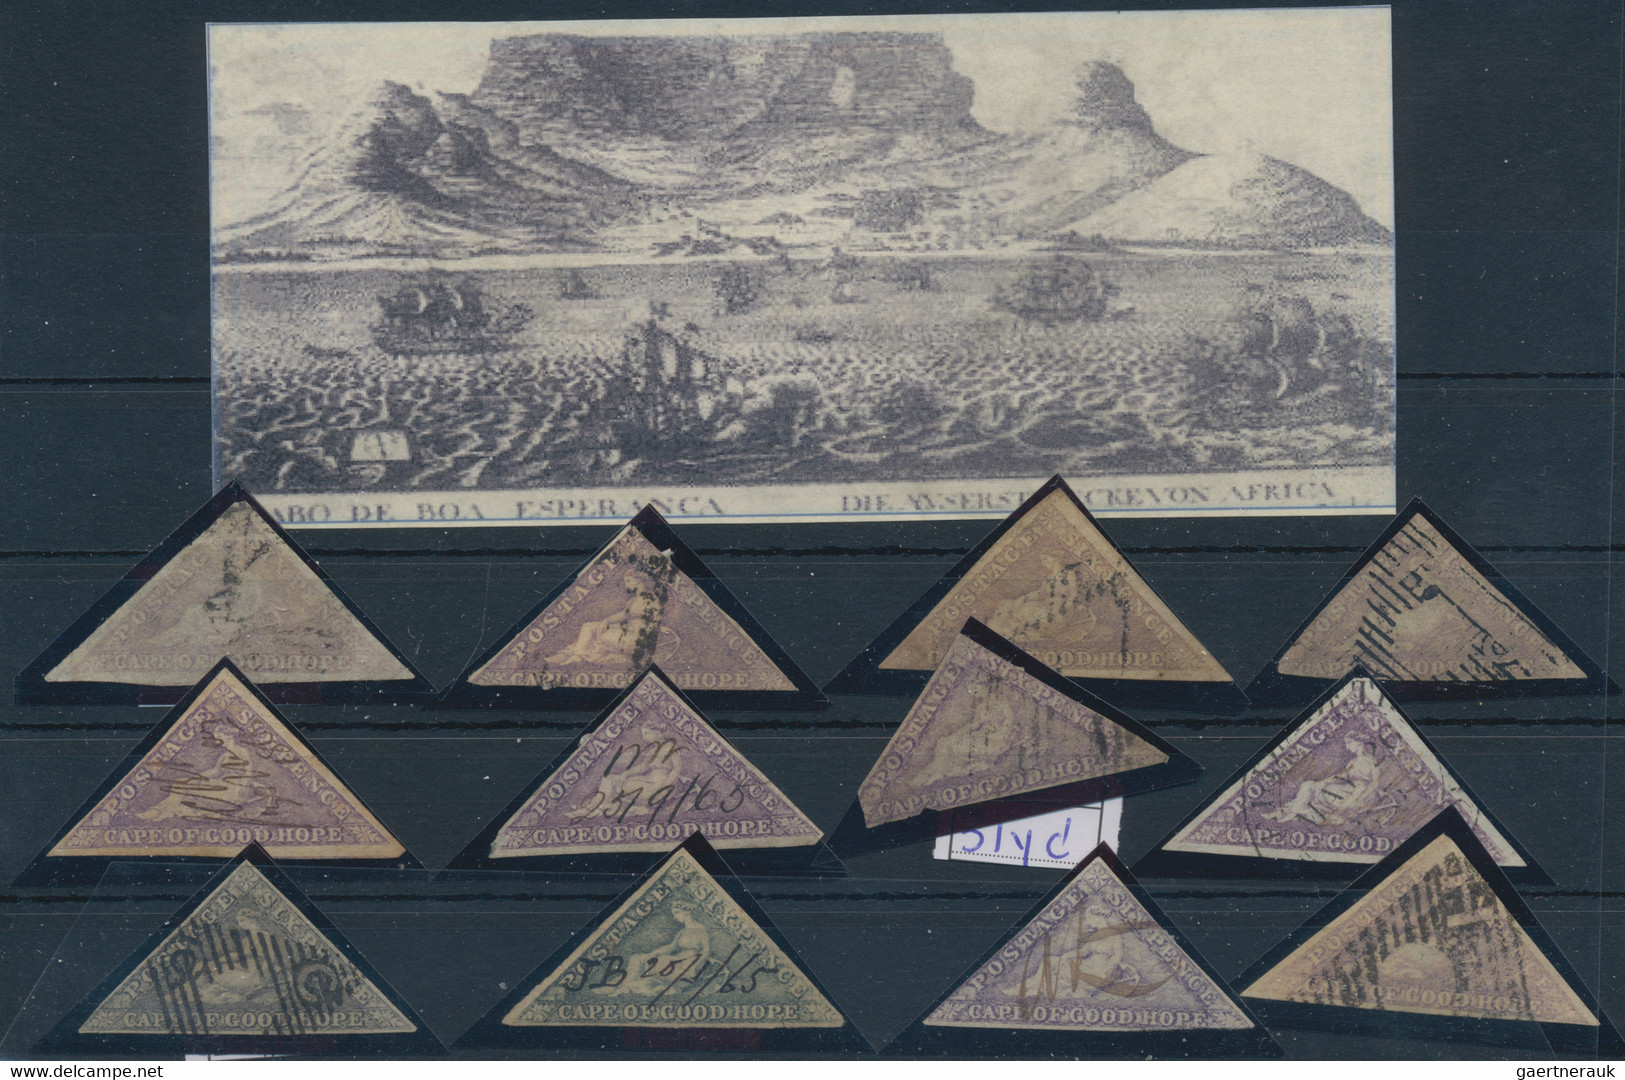 Cap of Good Hope: 1853/1863, very interesting collection "Cape of Good Hope" on